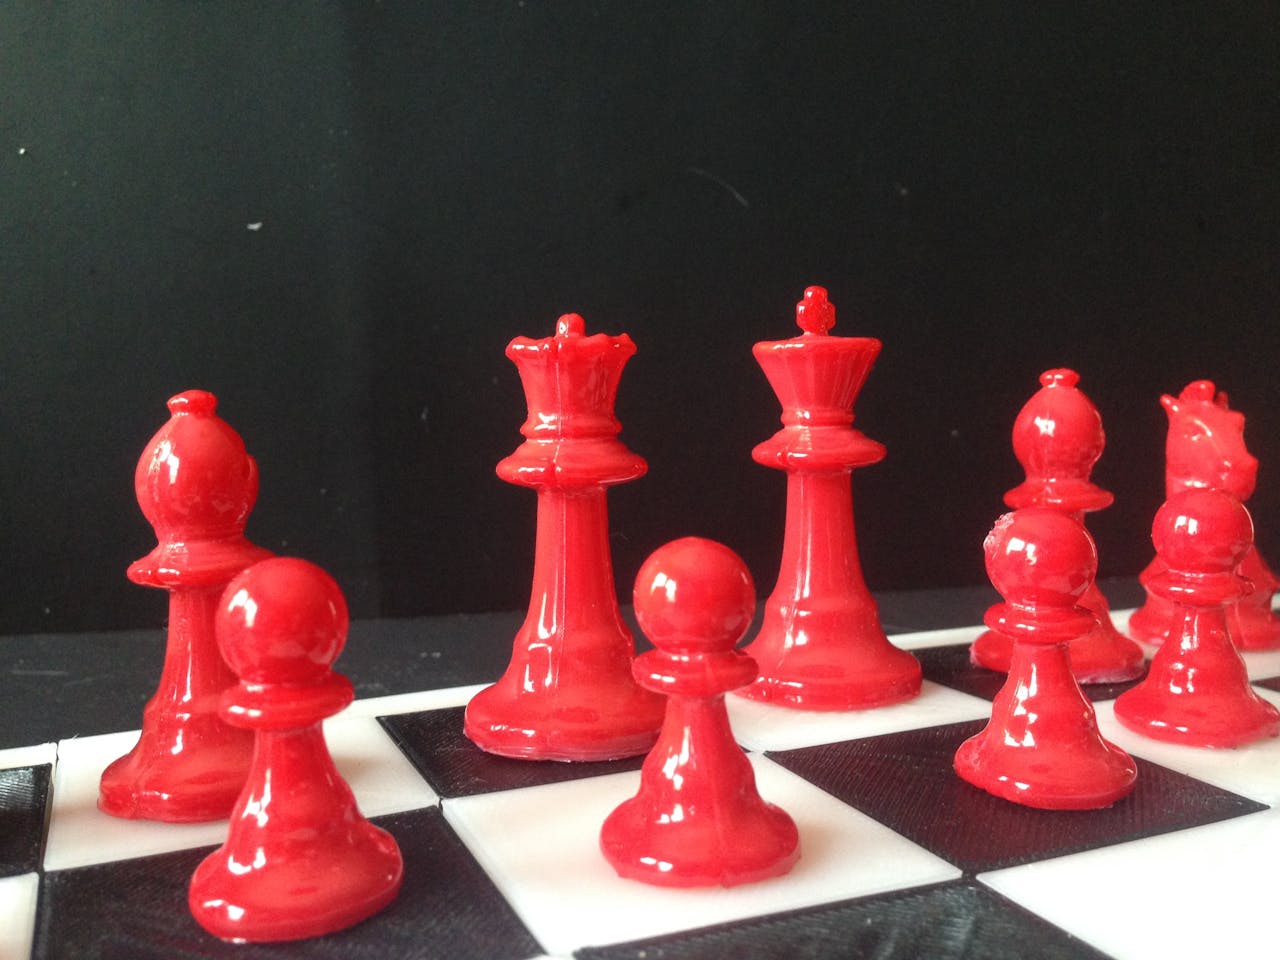 Cool Red Power Pieces Of The Chess Board Art Print by Created Prototype